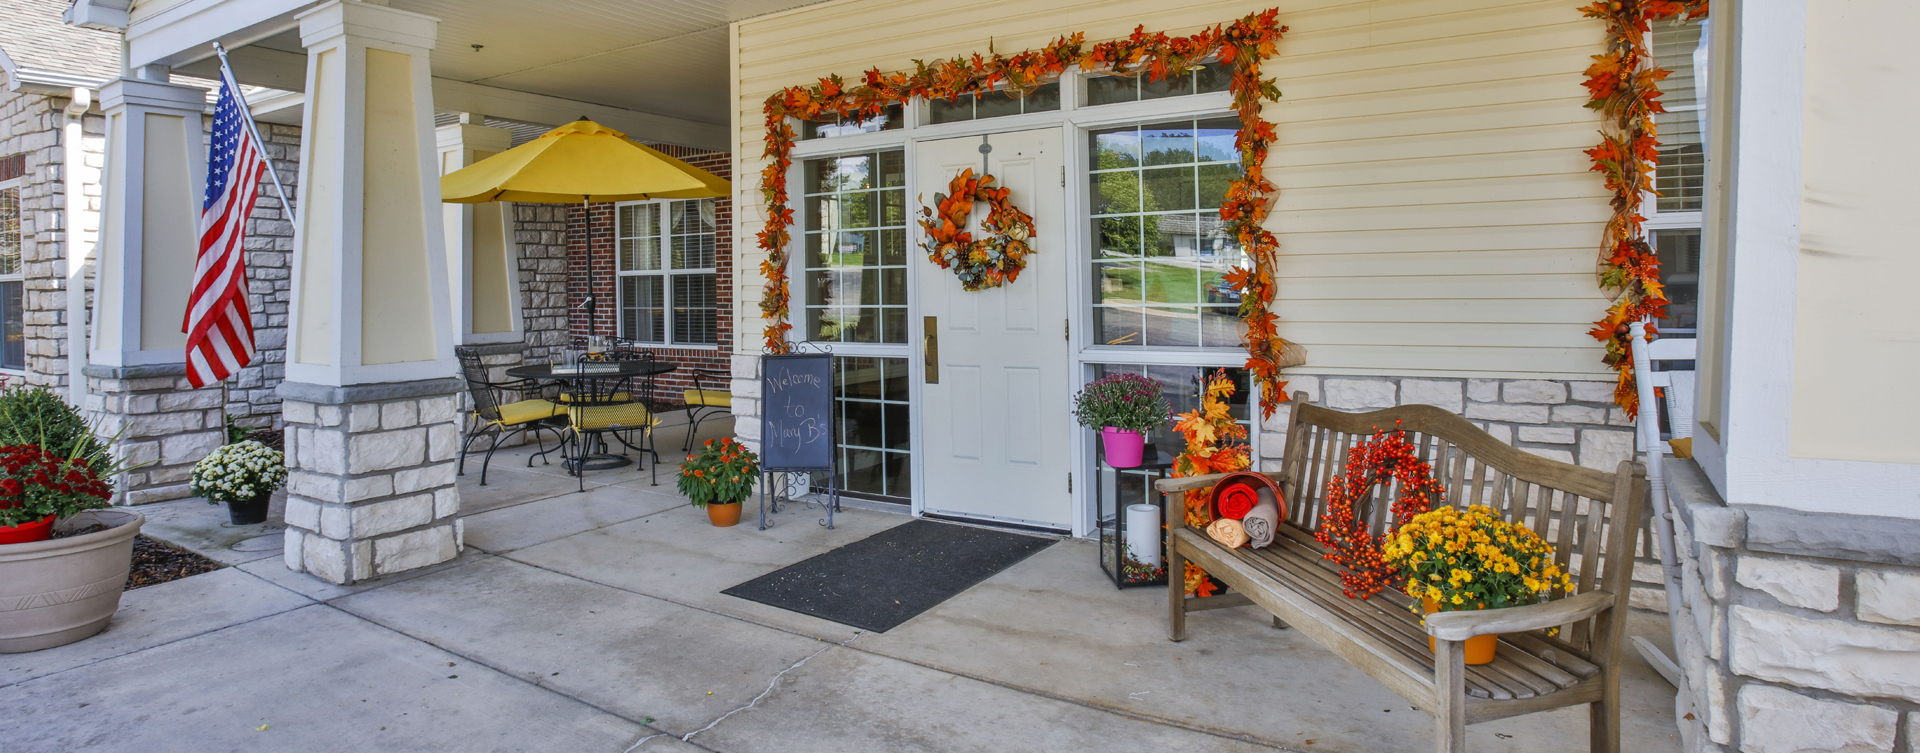 Relax in your favorite chair on the porch at Bickford of Peoria